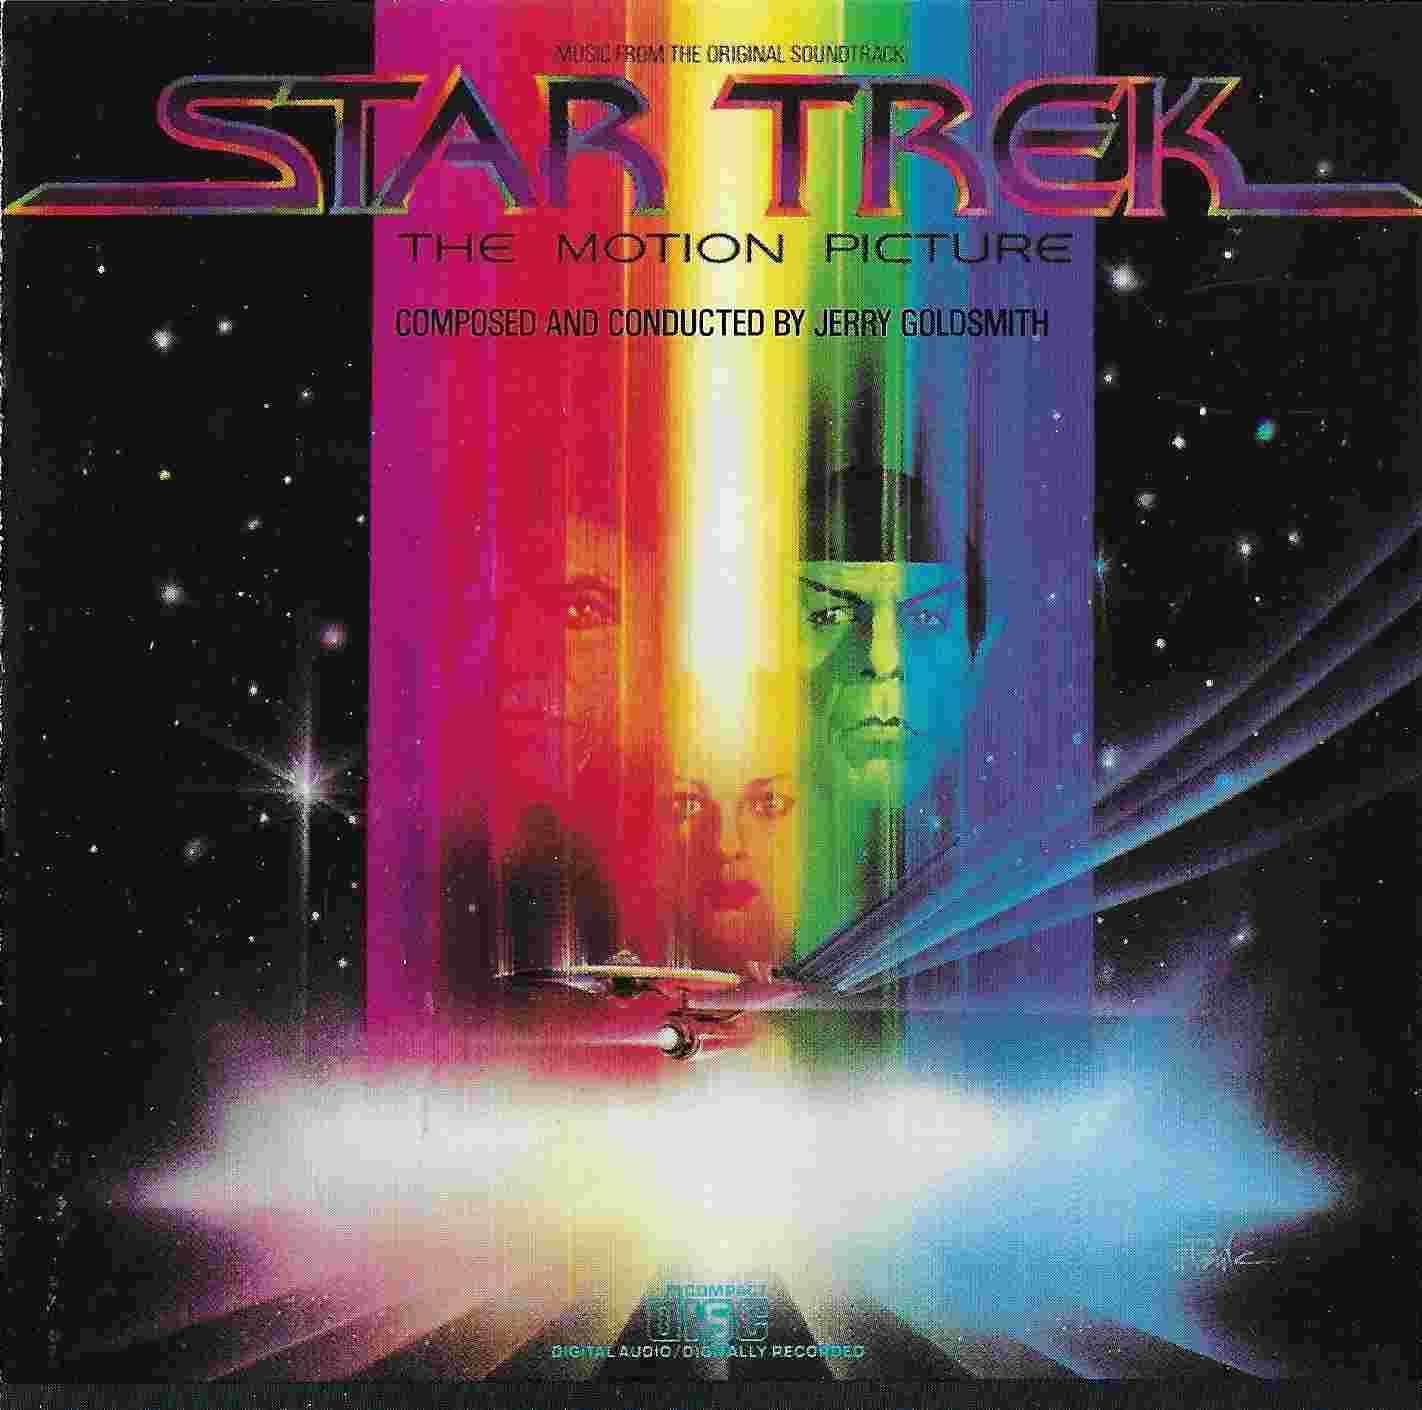 Picture of CK 36334 Star trek - The motion picture by artist Alexander Courrage / Jerry Goldsmith